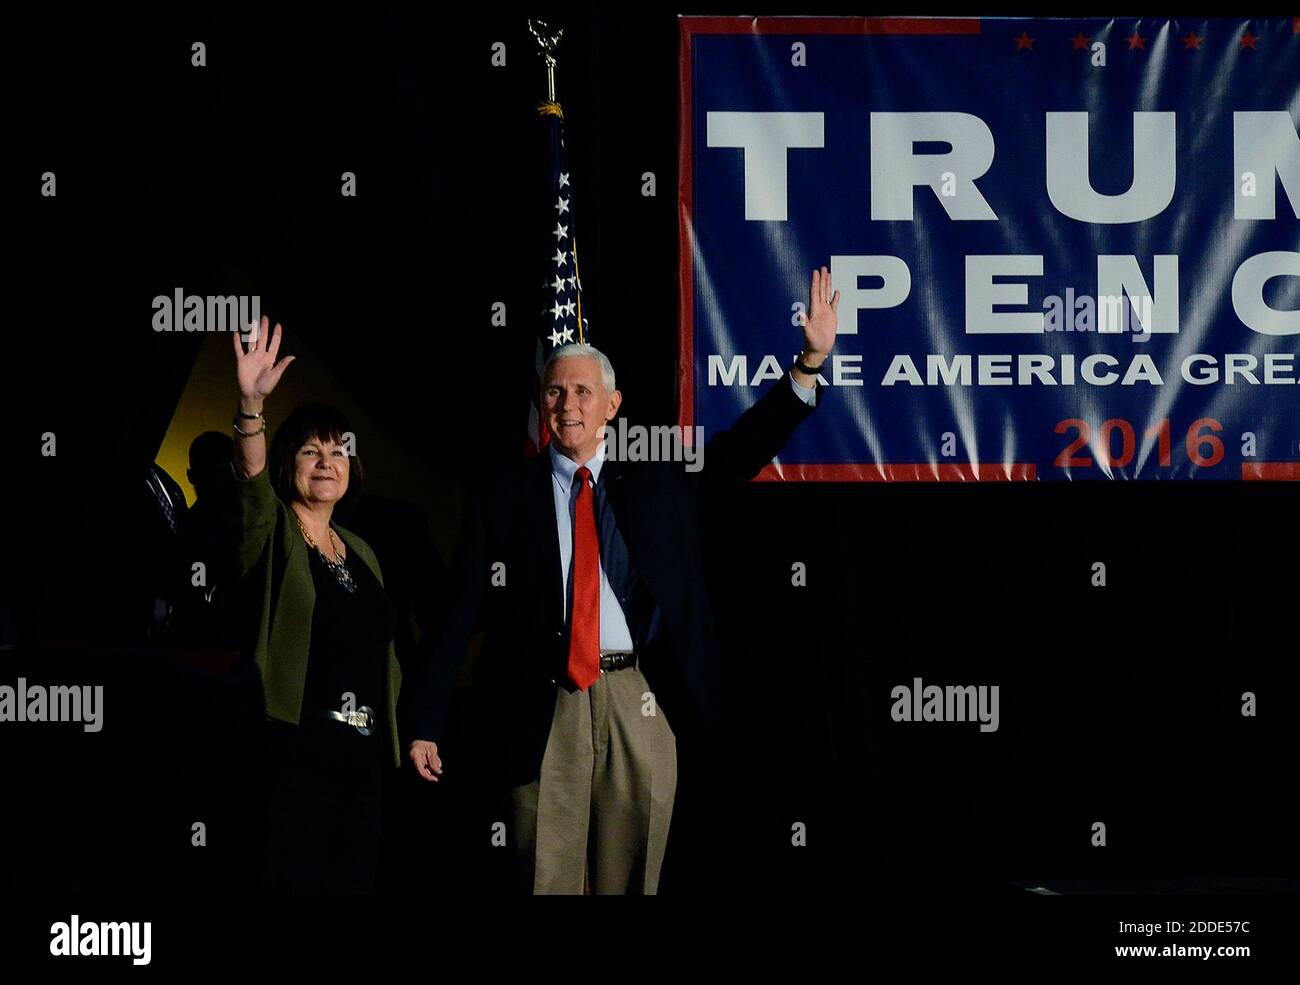 NO FILM, NO VIDEO, NO TV, NO DOCUMENTARY - Karen and Mike Pence enter a campaign rally to support Republican presidential nominee Donald Trump on Monday, Oct. 10, 2016 in Charlotte, NC, USA. Photo by John D. Simmons/Charlotte Observer/TNS/ABACAPRESS.COM Stock Photo